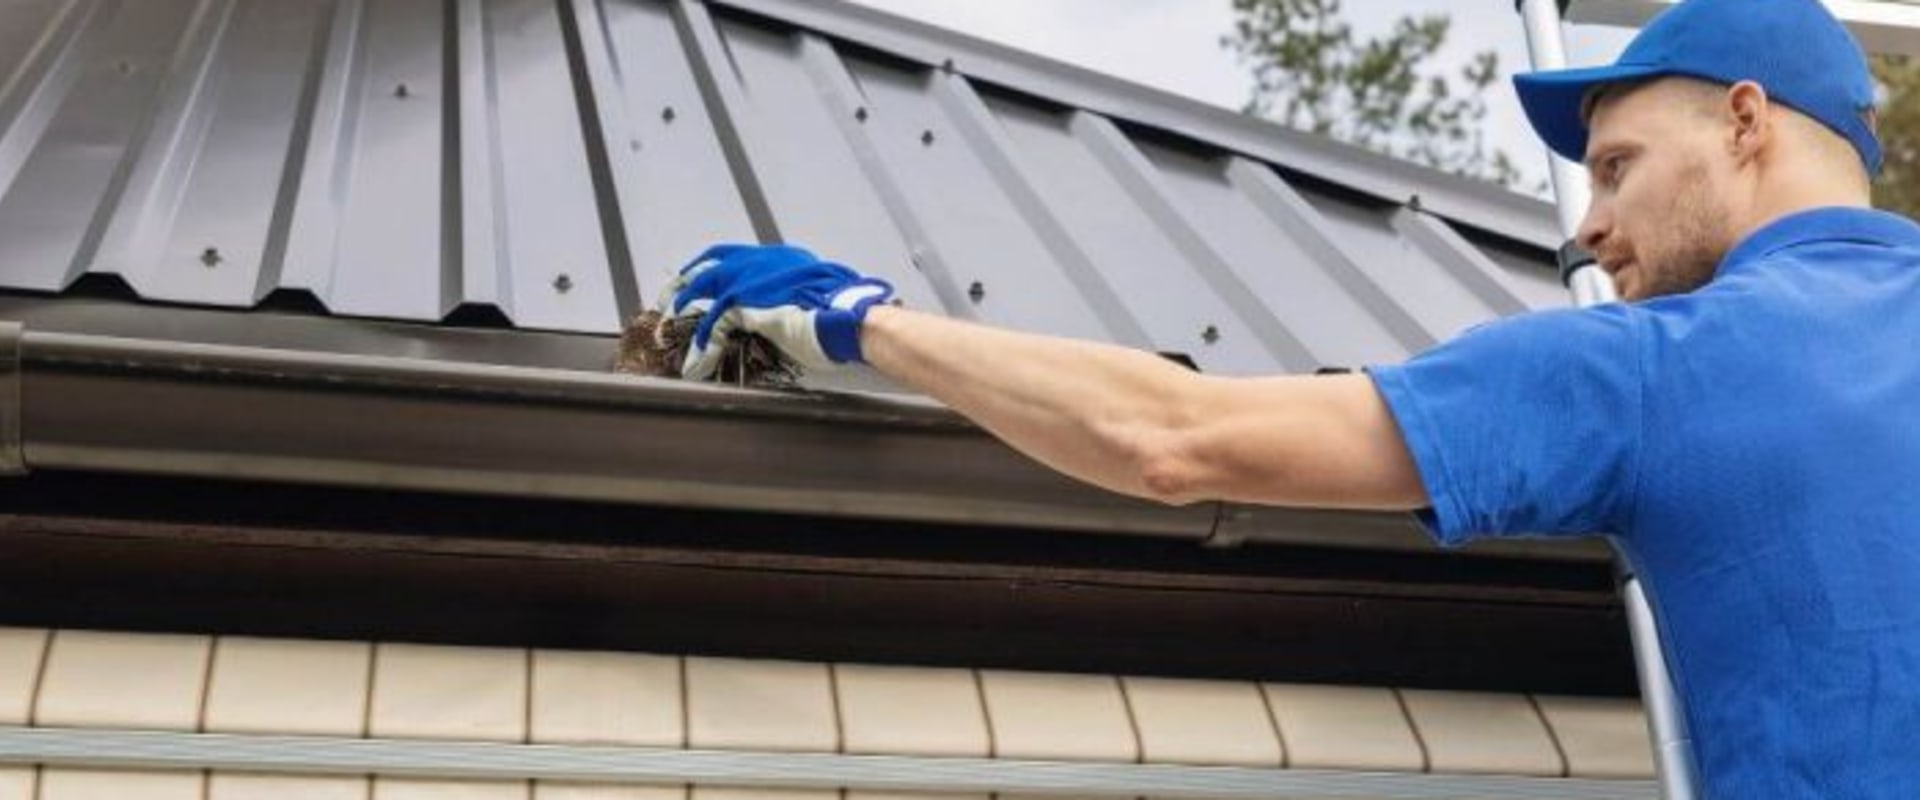 The Benefits Of Regular Roof Cleaning For Metal Roofs In Vancouver